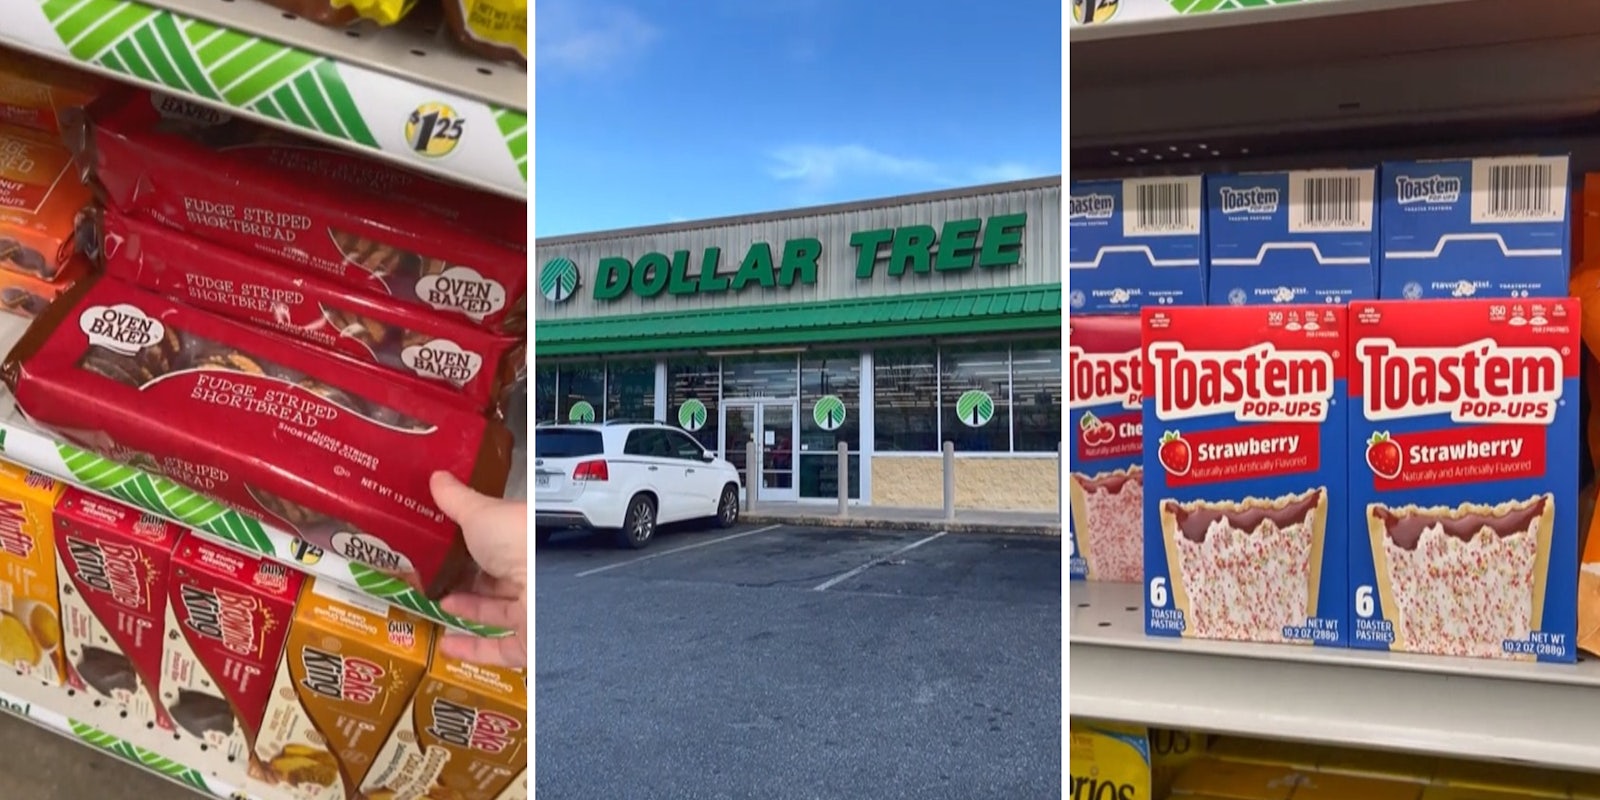 Woman shares Dollar Tree alternatives to Kellogg’s-branded products